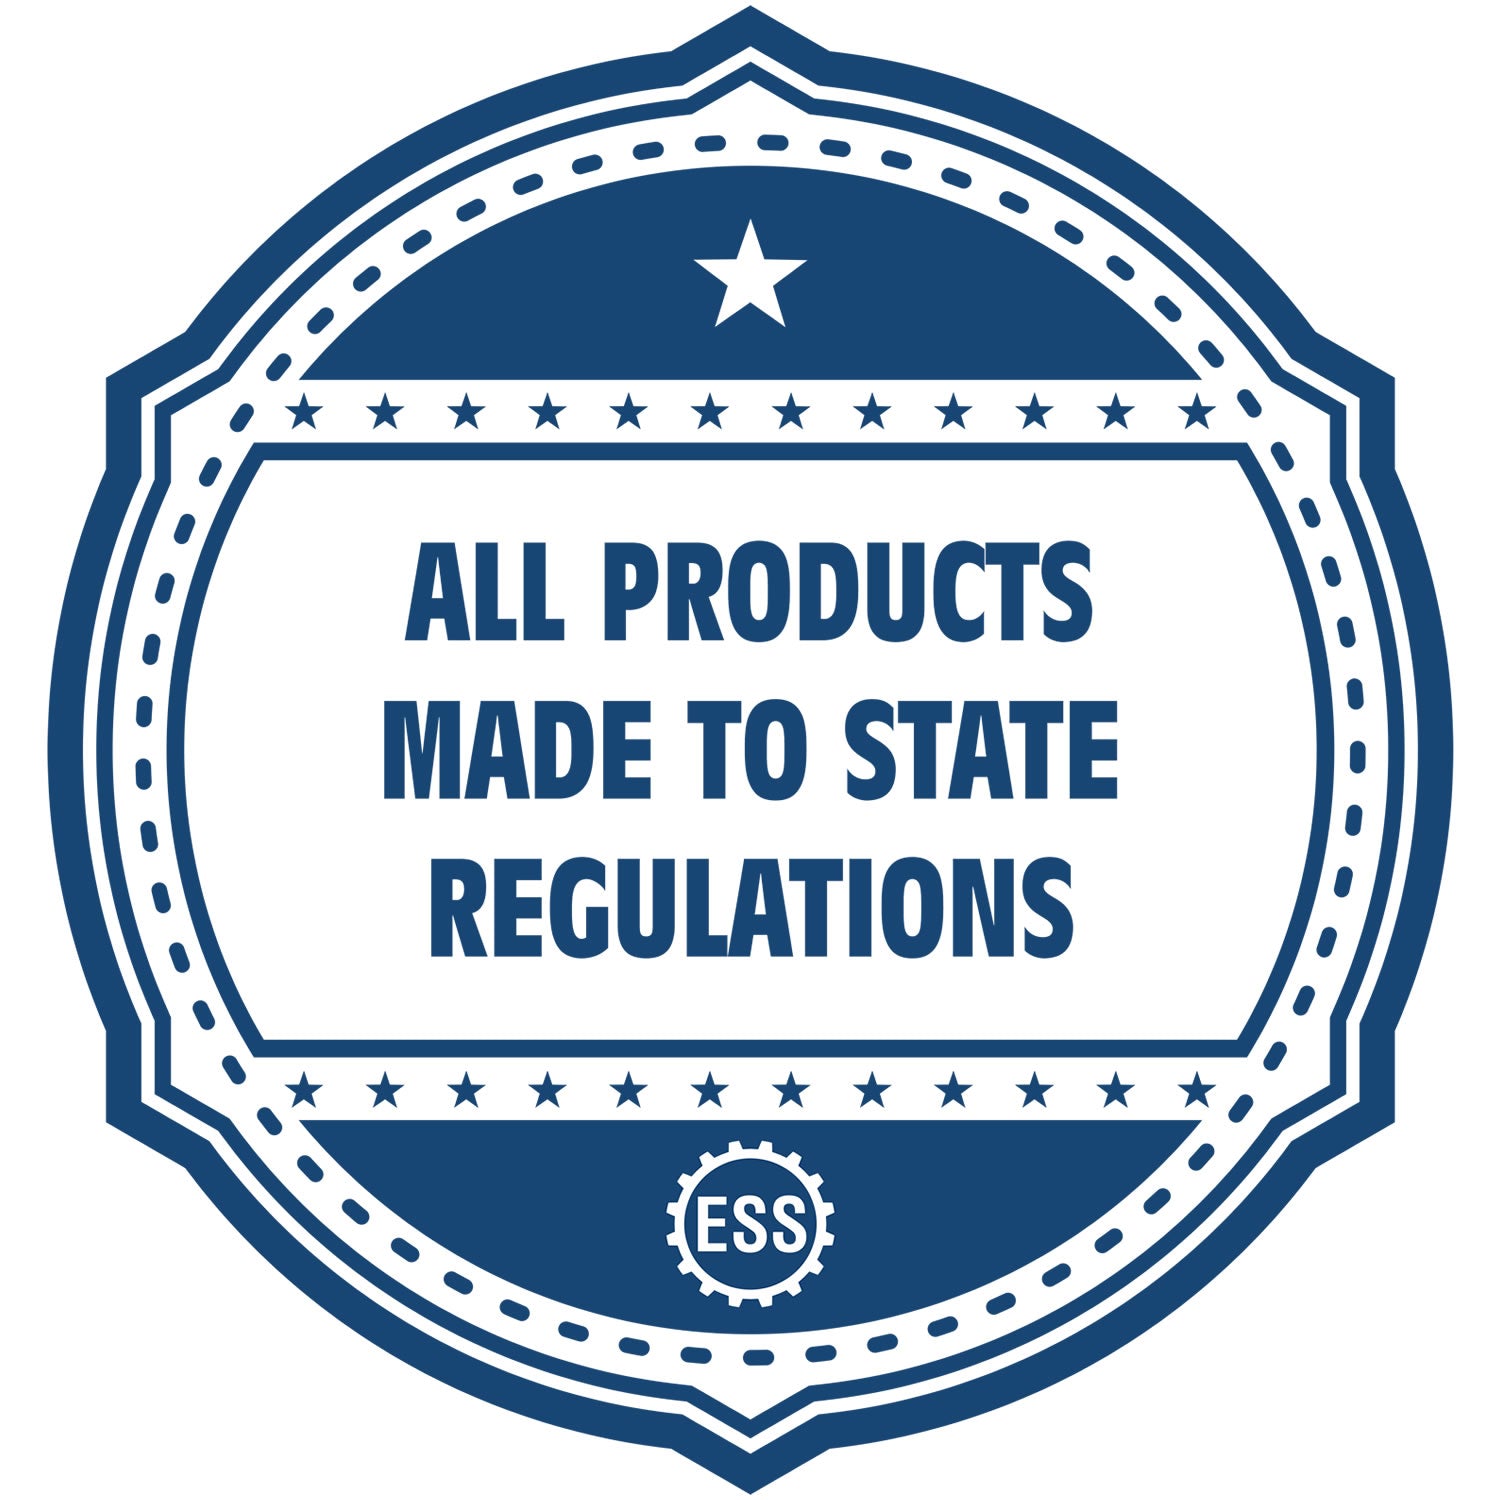 An icon or badge element for the State of Tennessee Extended Long Reach Landscape Architect Seal Embosser showing that this product is made in compliance with state regulations.